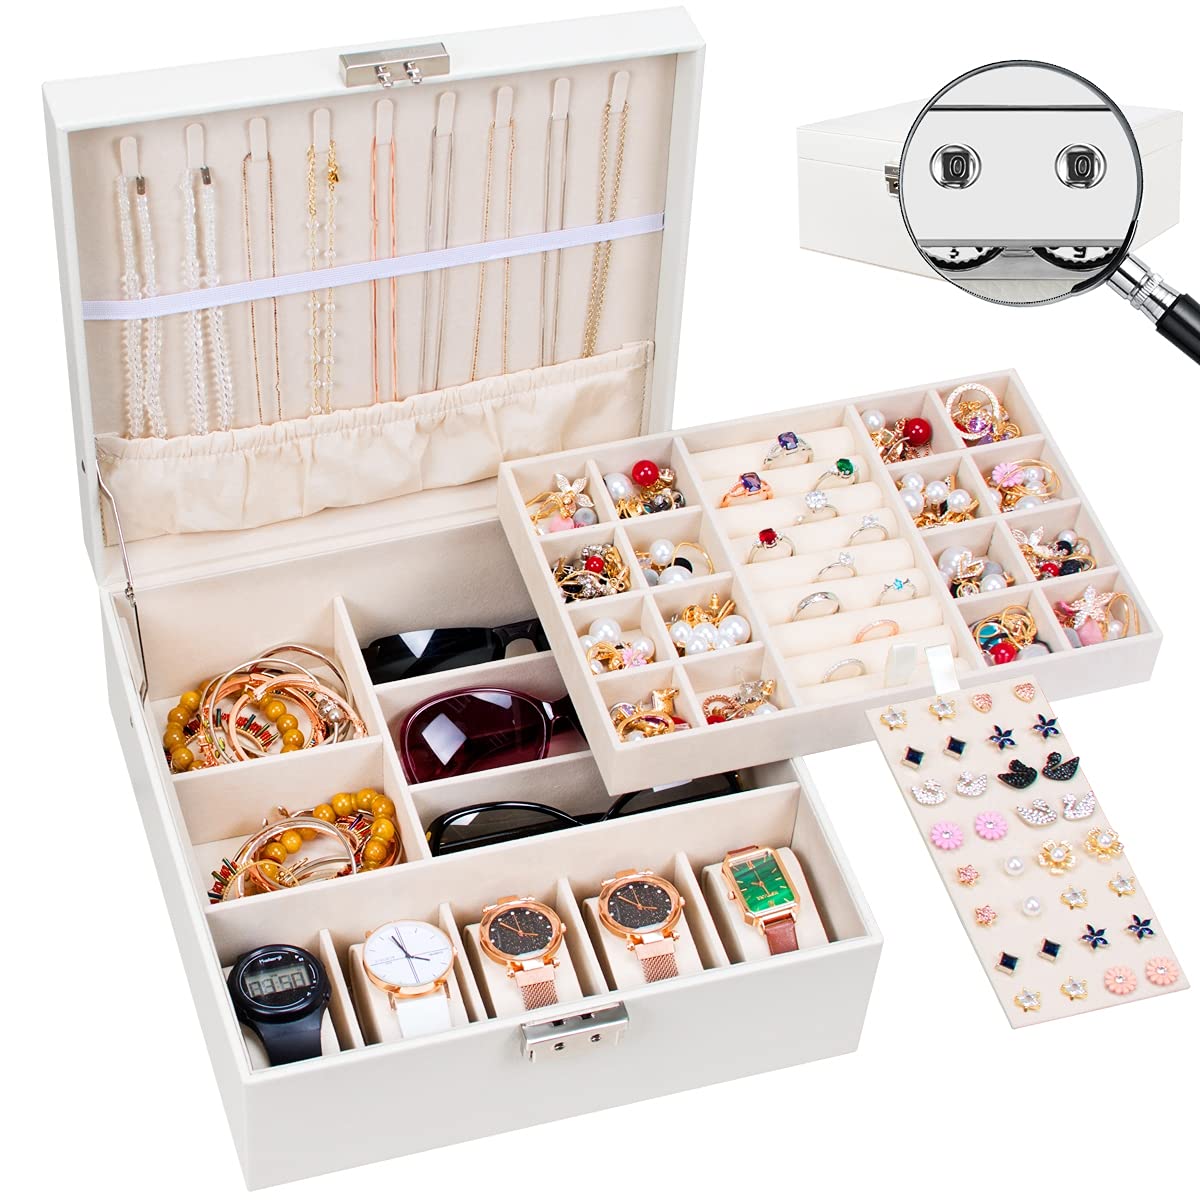 AJINGSHANG Jewellery Box Organiser for Women Girls with Code Lock, Jewelry Storage Two Layers 26 Compartments with Ring Holder, PU Leather Sunglasses Watch Bracelet Necklace Earrings Display Case